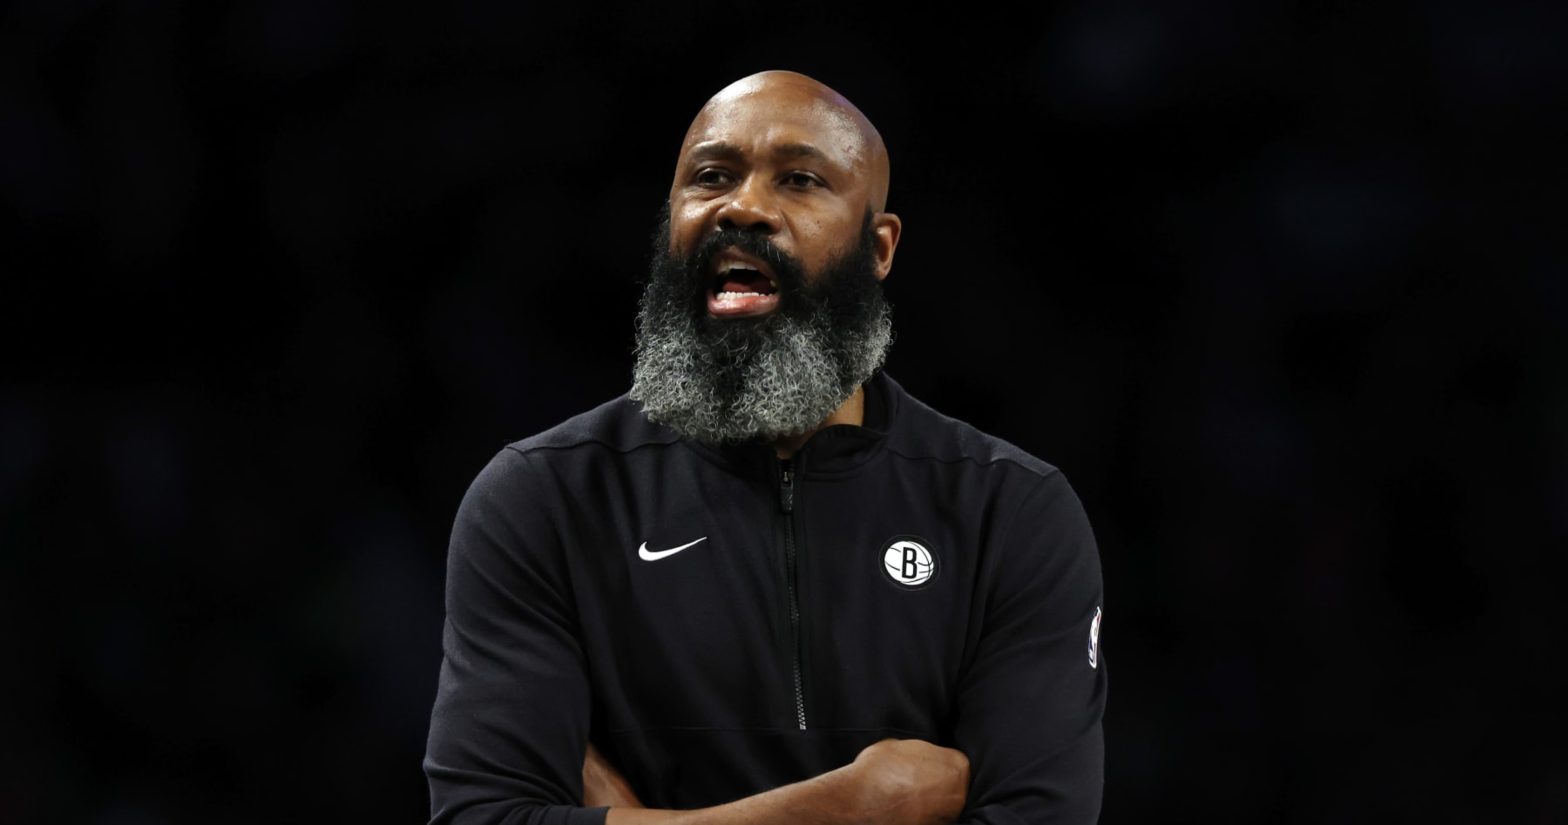 Nets Rumors: Insiders Thought Jacque Vaughn Hindered BK’s Pursuit of Top NBA Players